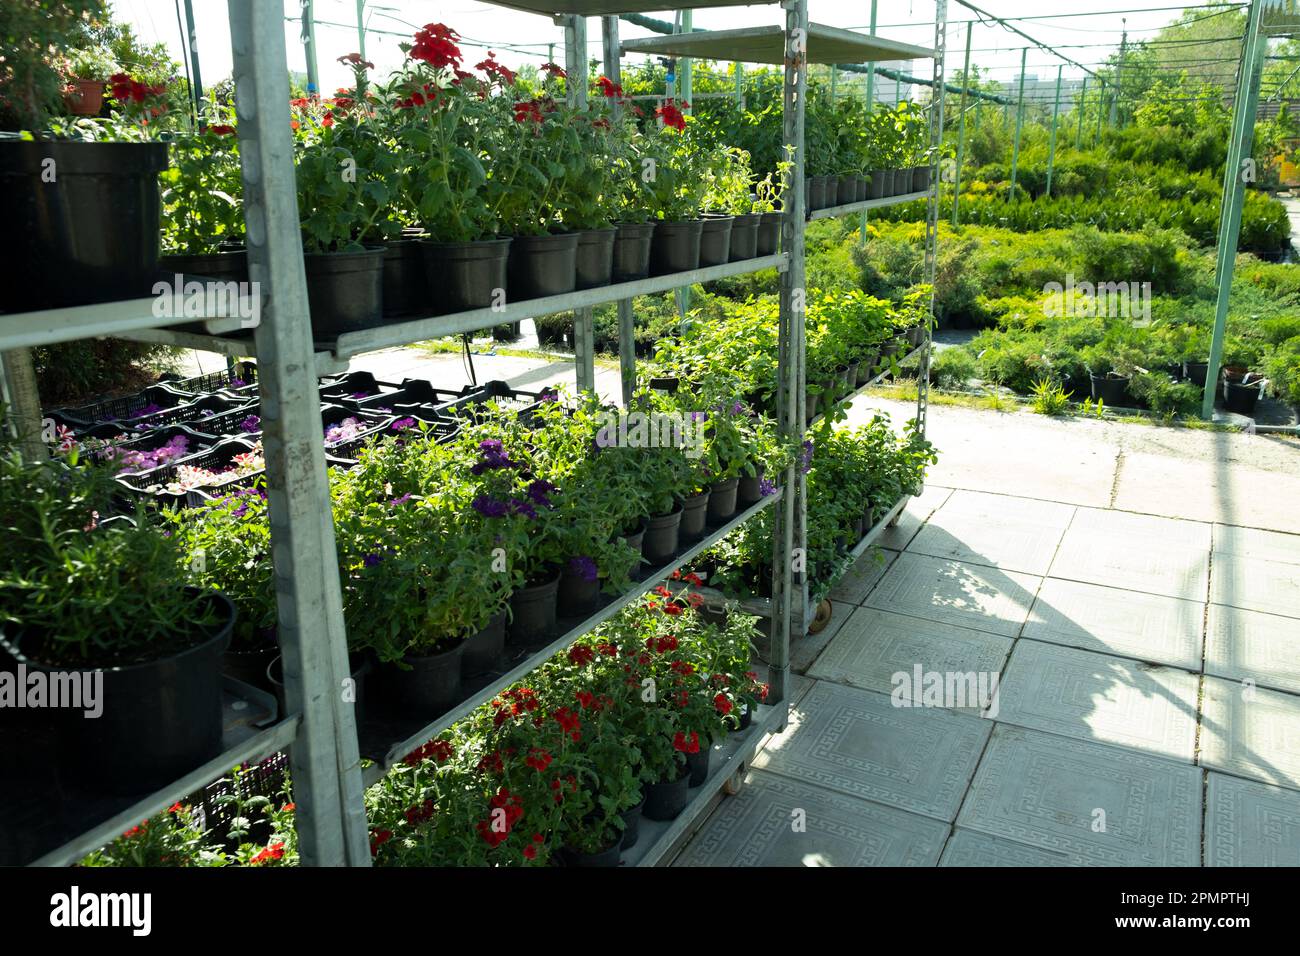 Plant nursery for sale in pots. Landscaping of the garden and terraces. Selling flower seedlings in pots. Stock Photo